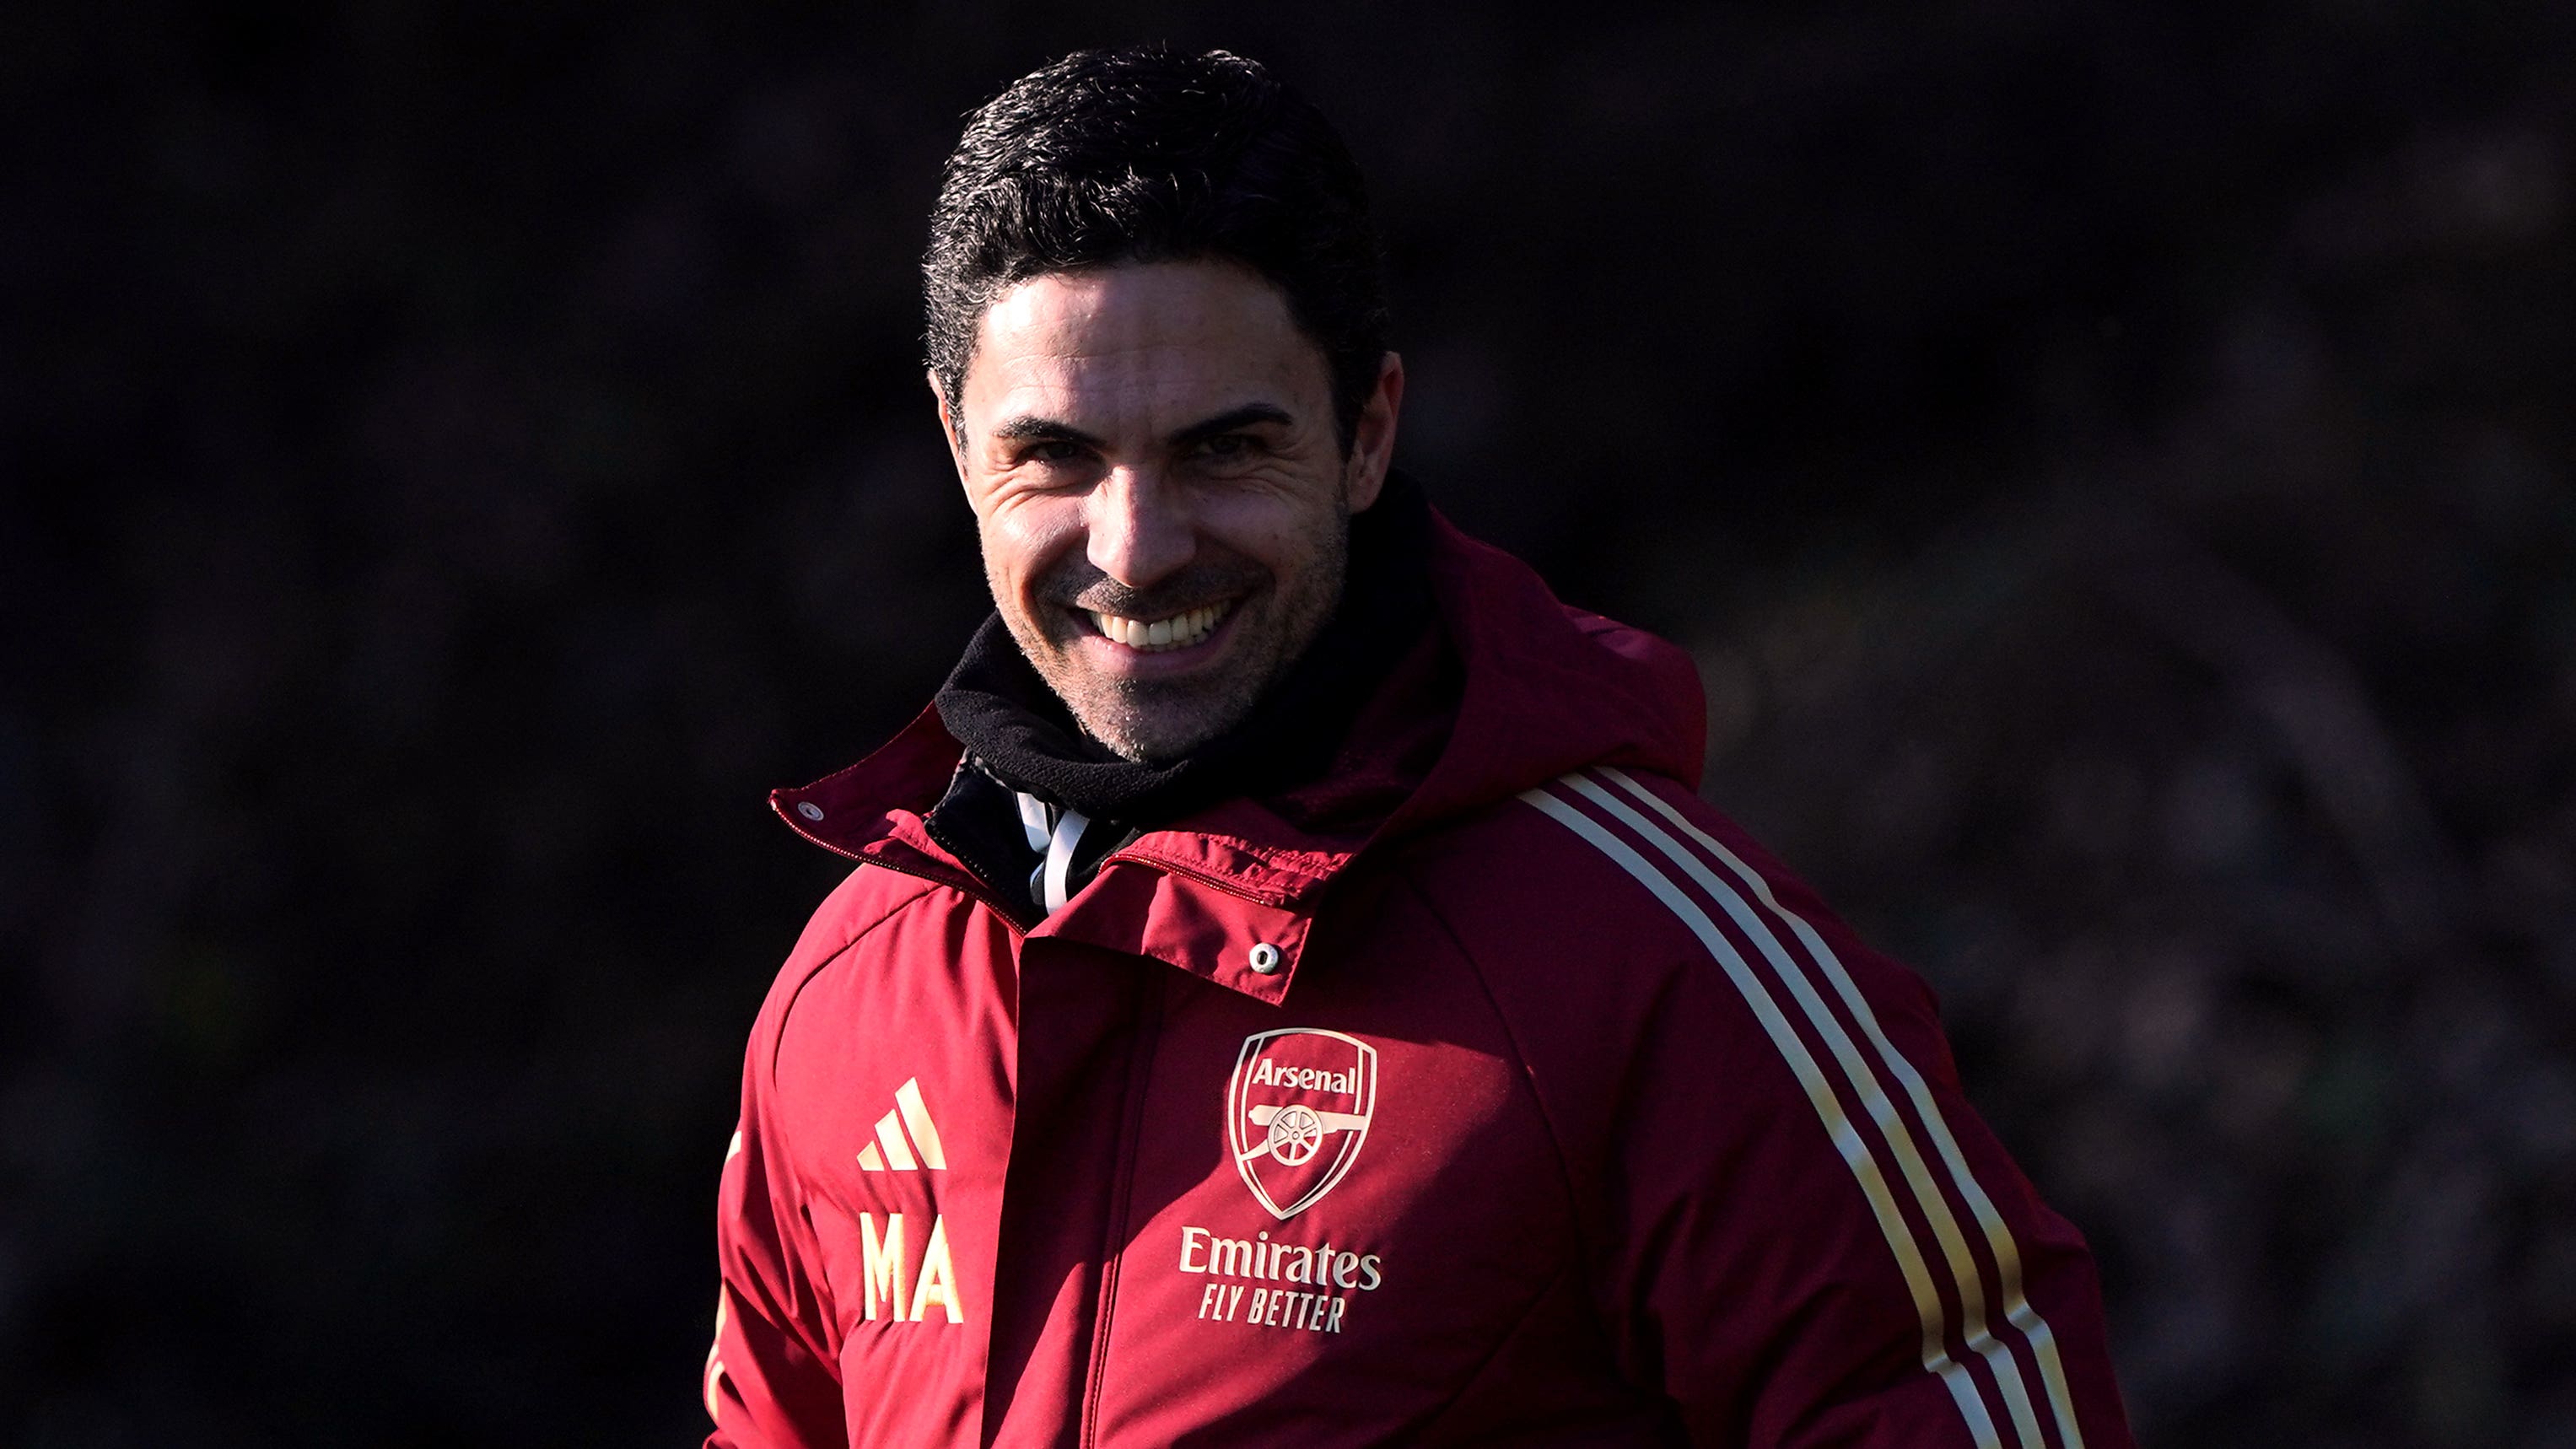 Mikel Arteta challenges Arsenal to end 11-year hoodoo at Anfield